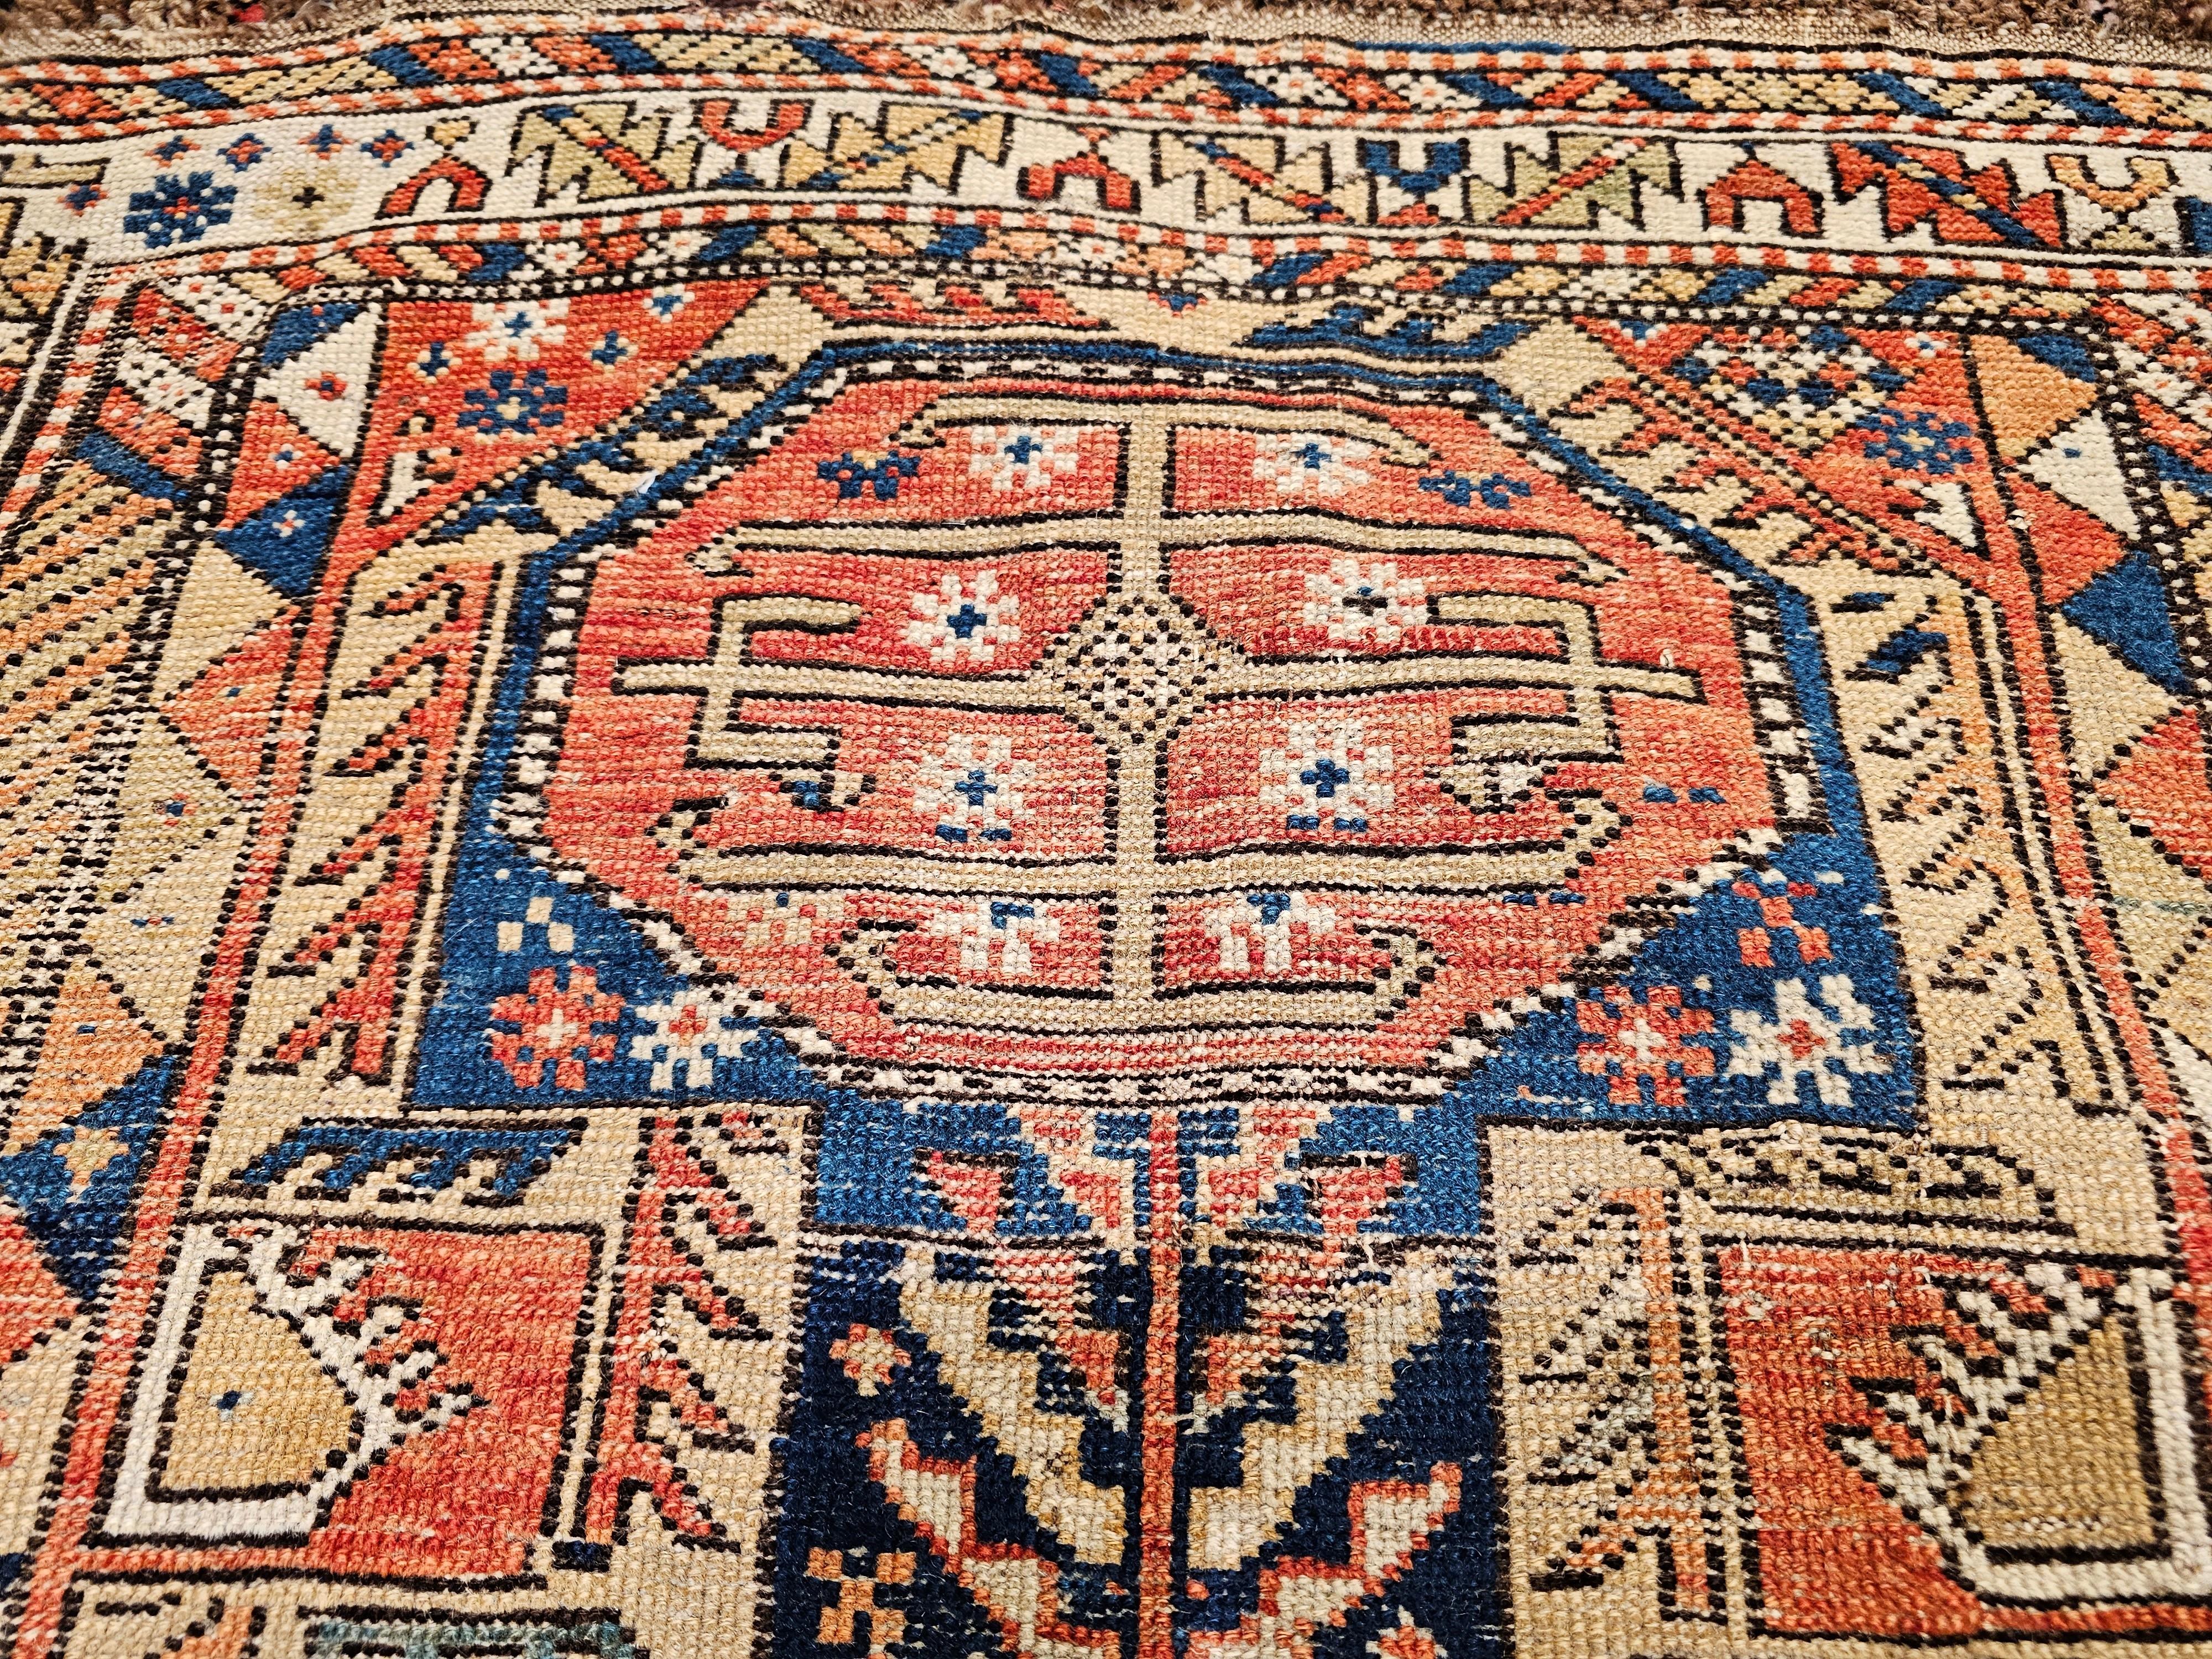 19th Century Caucasian Shirvan Area Rug in Medallion Pattern in Navy Blue, Ivory In Good Condition For Sale In Barrington, IL